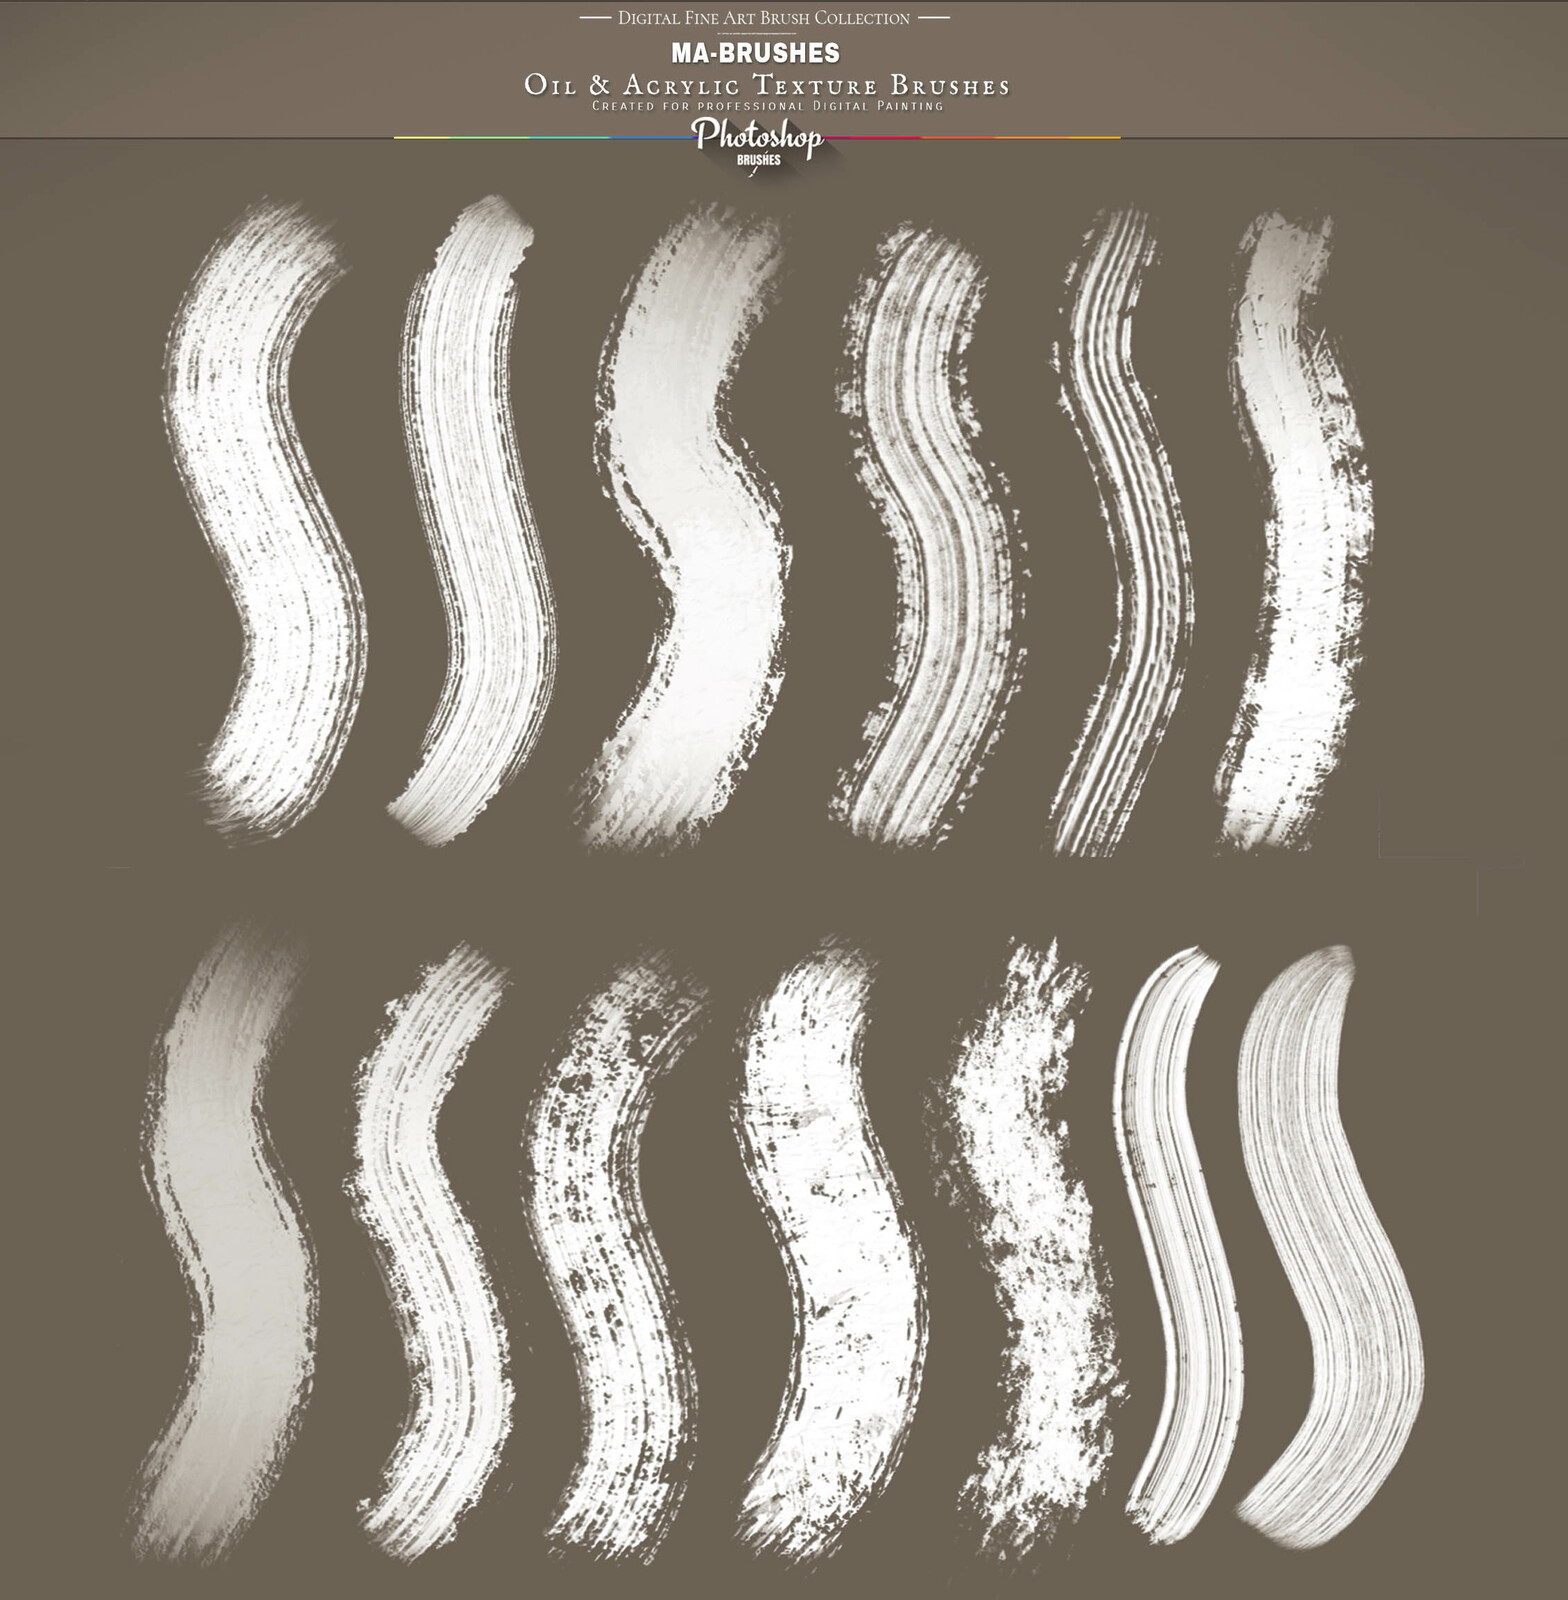 Photoshop MA-BRUSHES - Artistic, digital Brushes for every digital Artist!